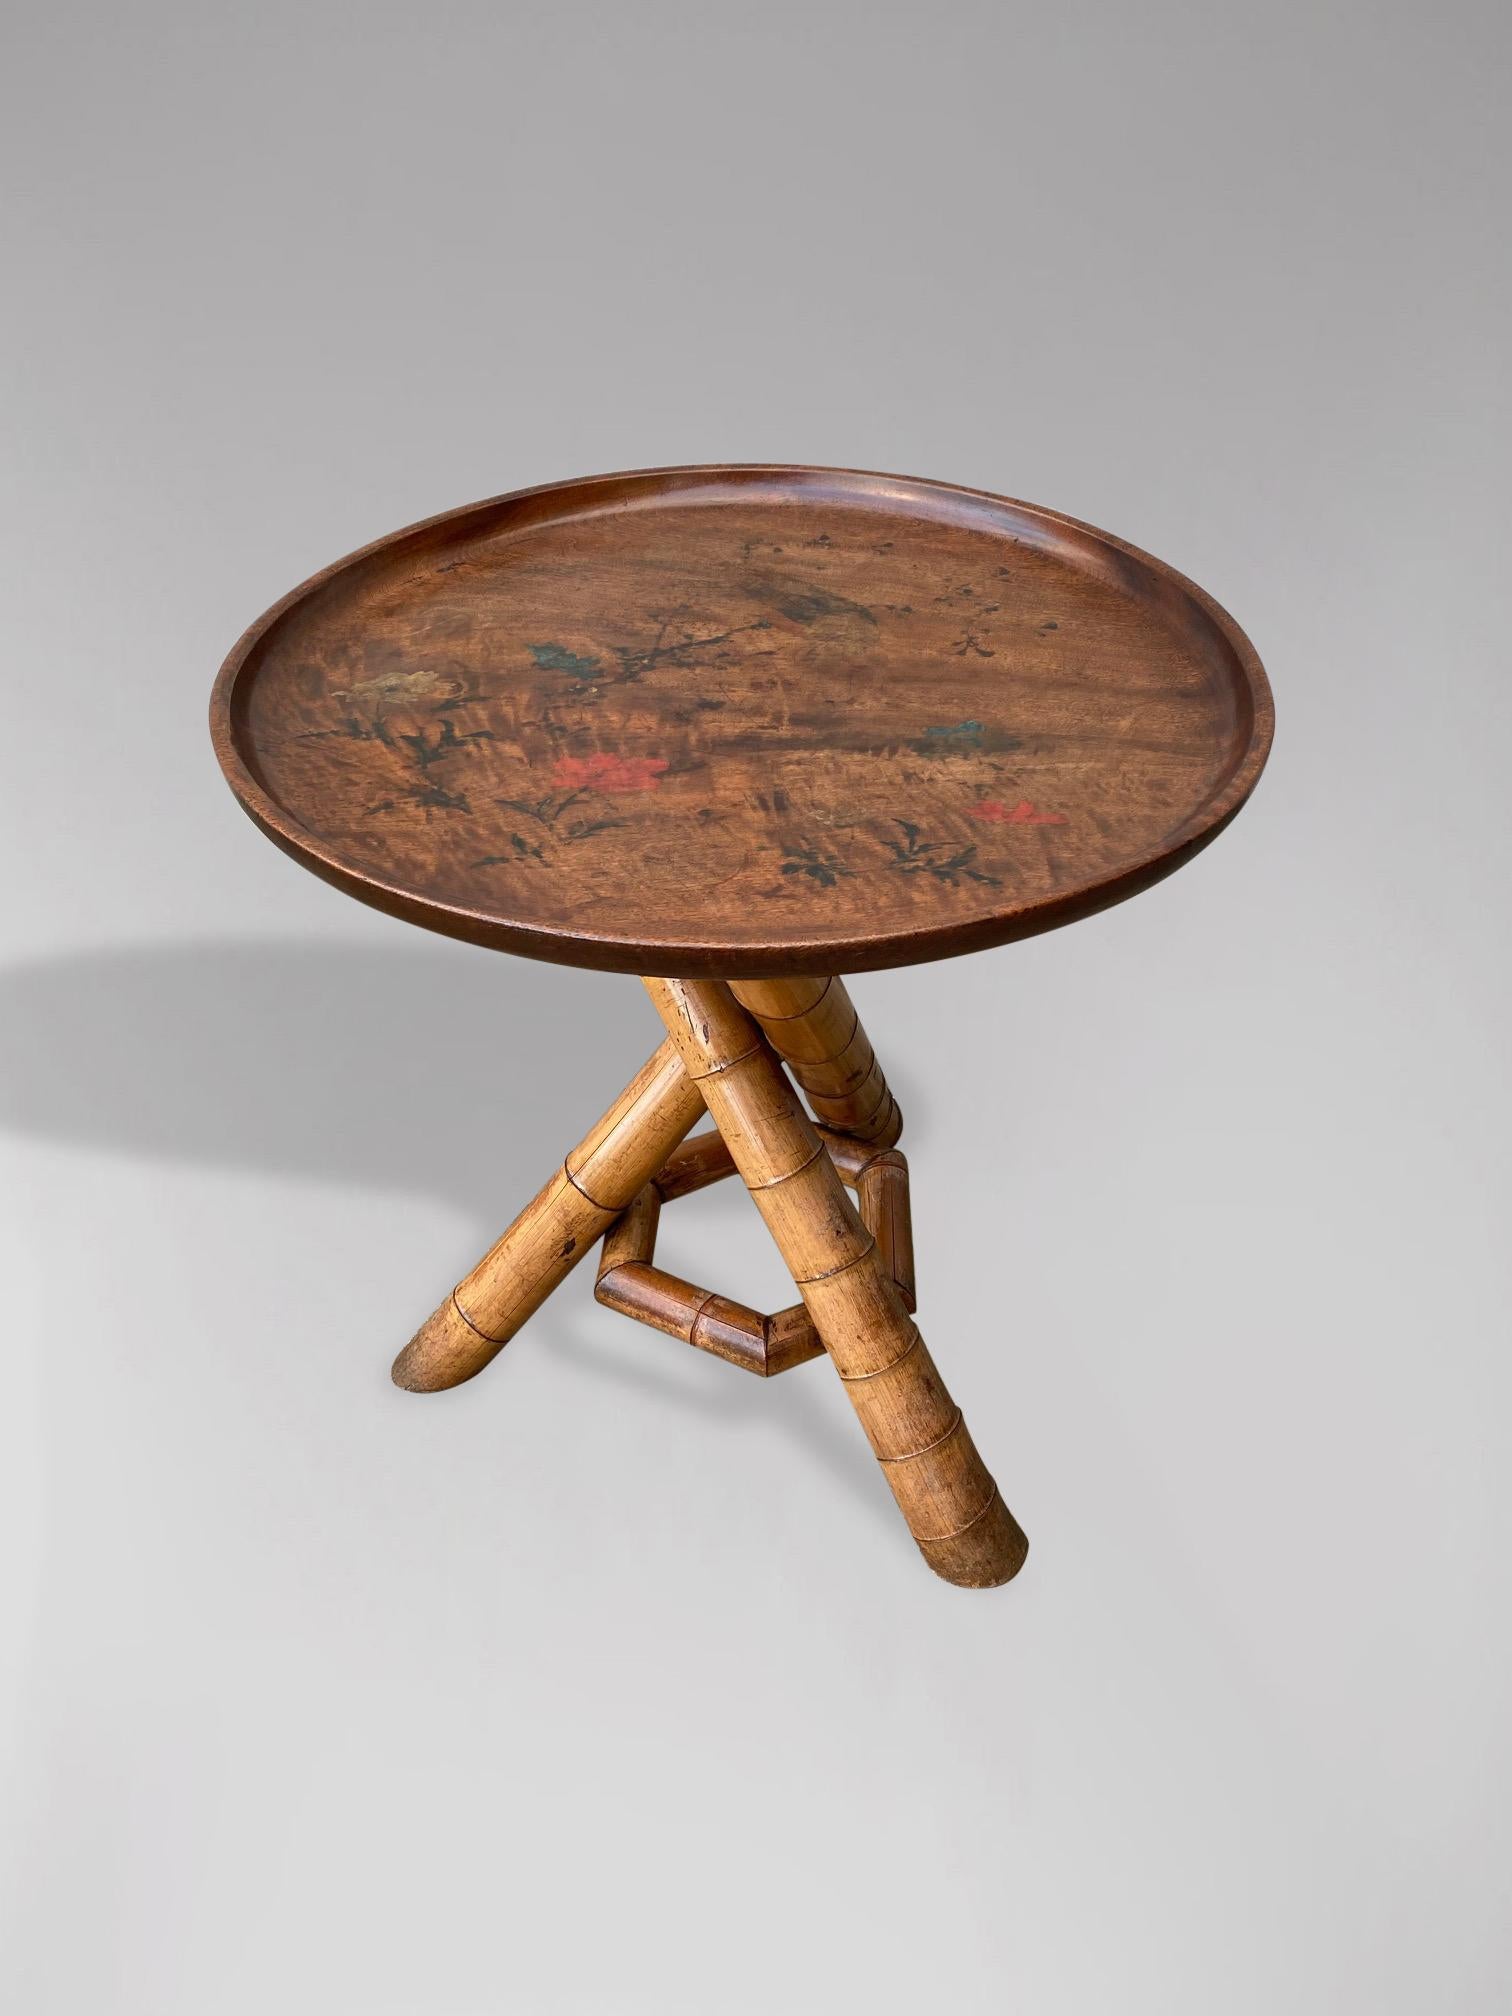 19th Century Colonial Bamboo Circular Tripod Table In Good Condition For Sale In Petworth,West Sussex, GB